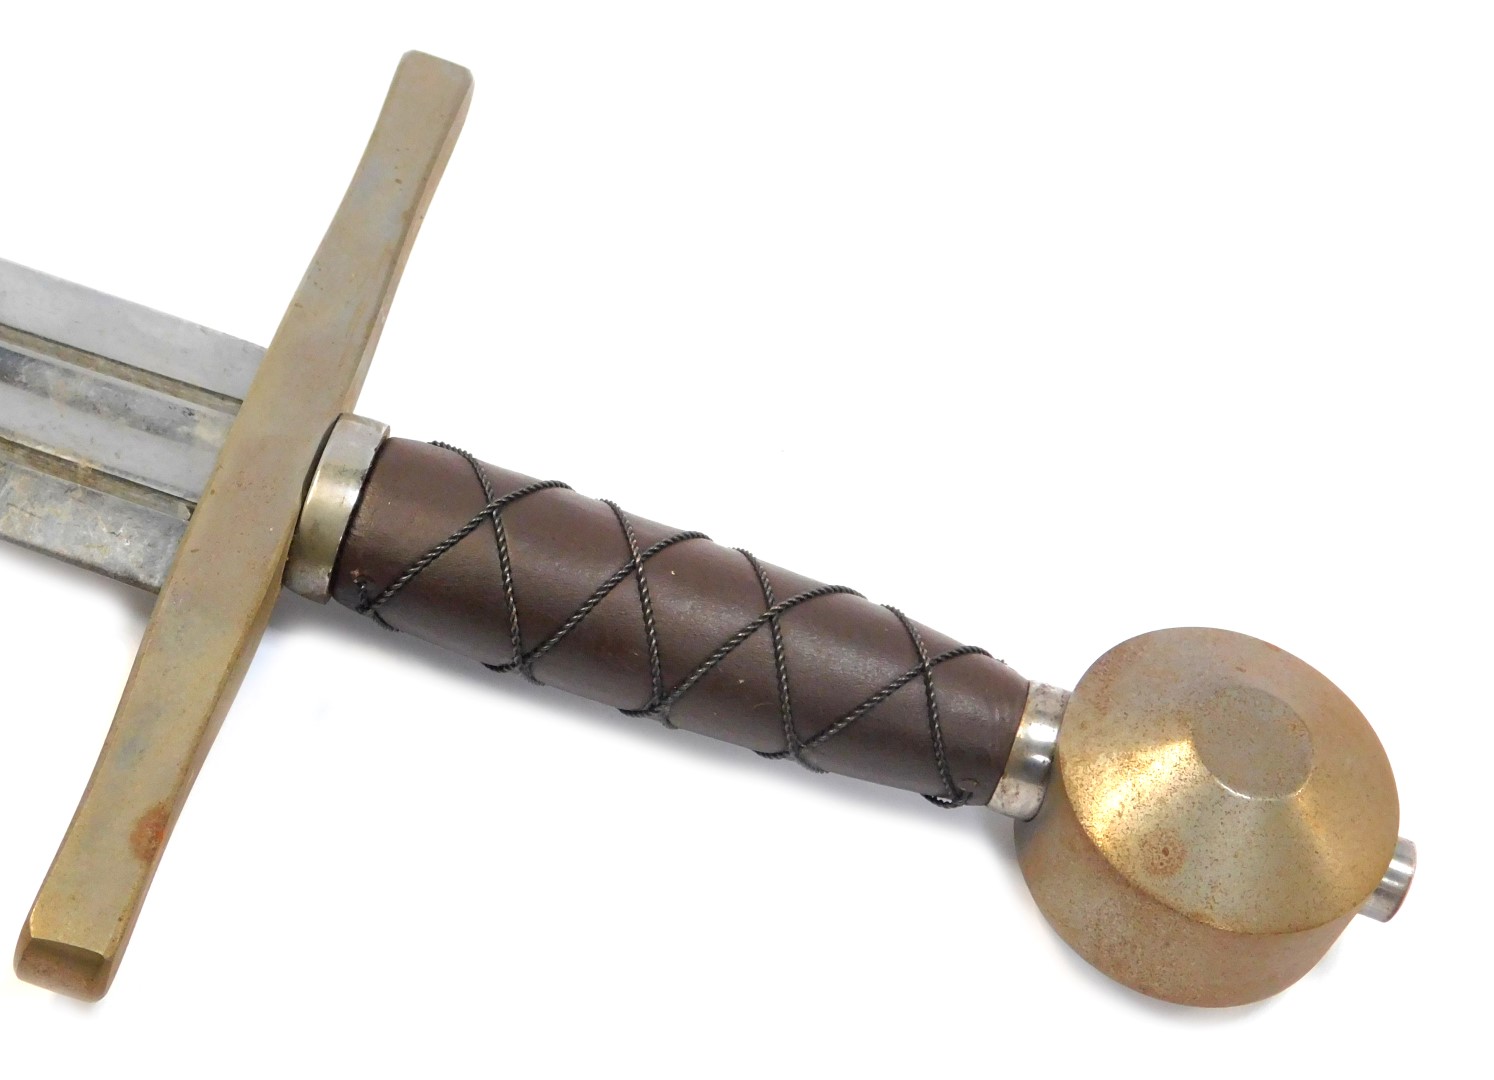 A replica medieval broad sword, with circular pommel, brown leather grip with twisted wirework cross